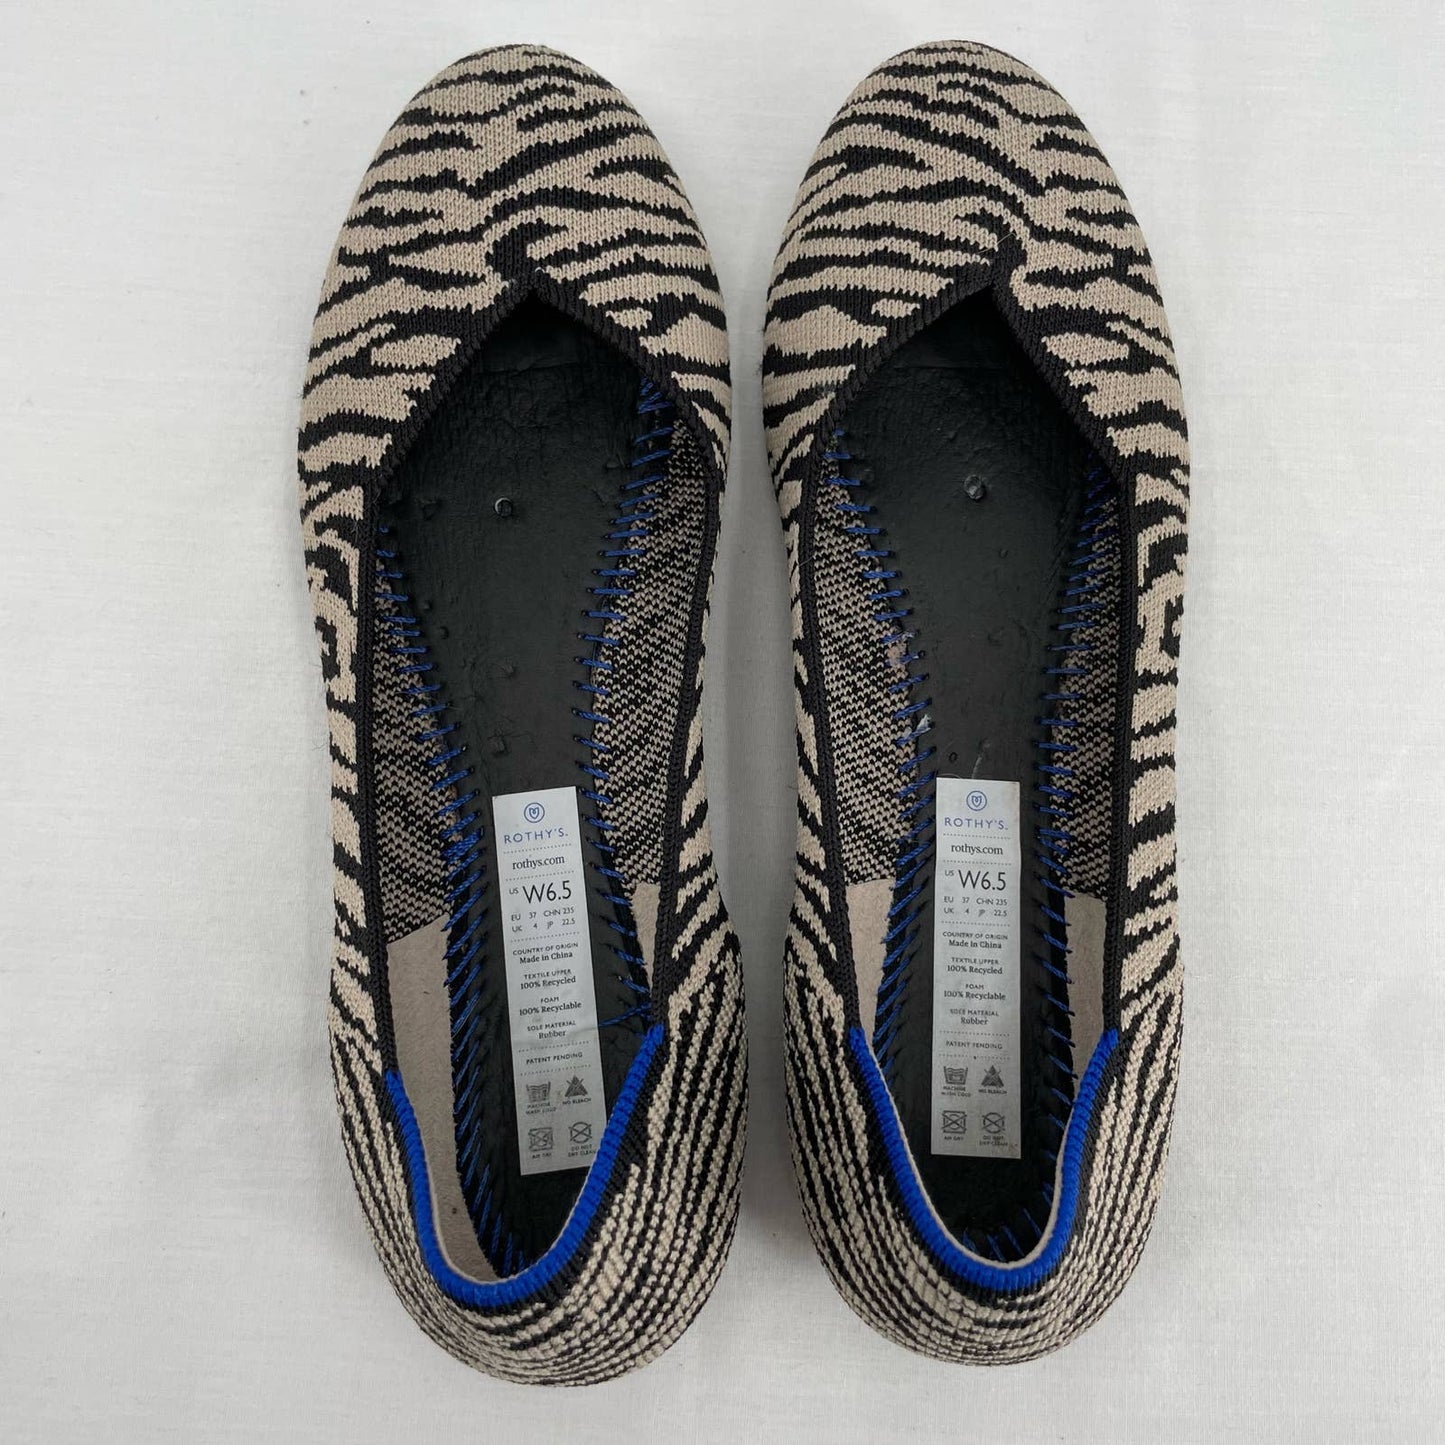 Rothy’s The Flat in Black Zebra Neutral Tapue Tan Printed Sustainable Flats Size 6.5